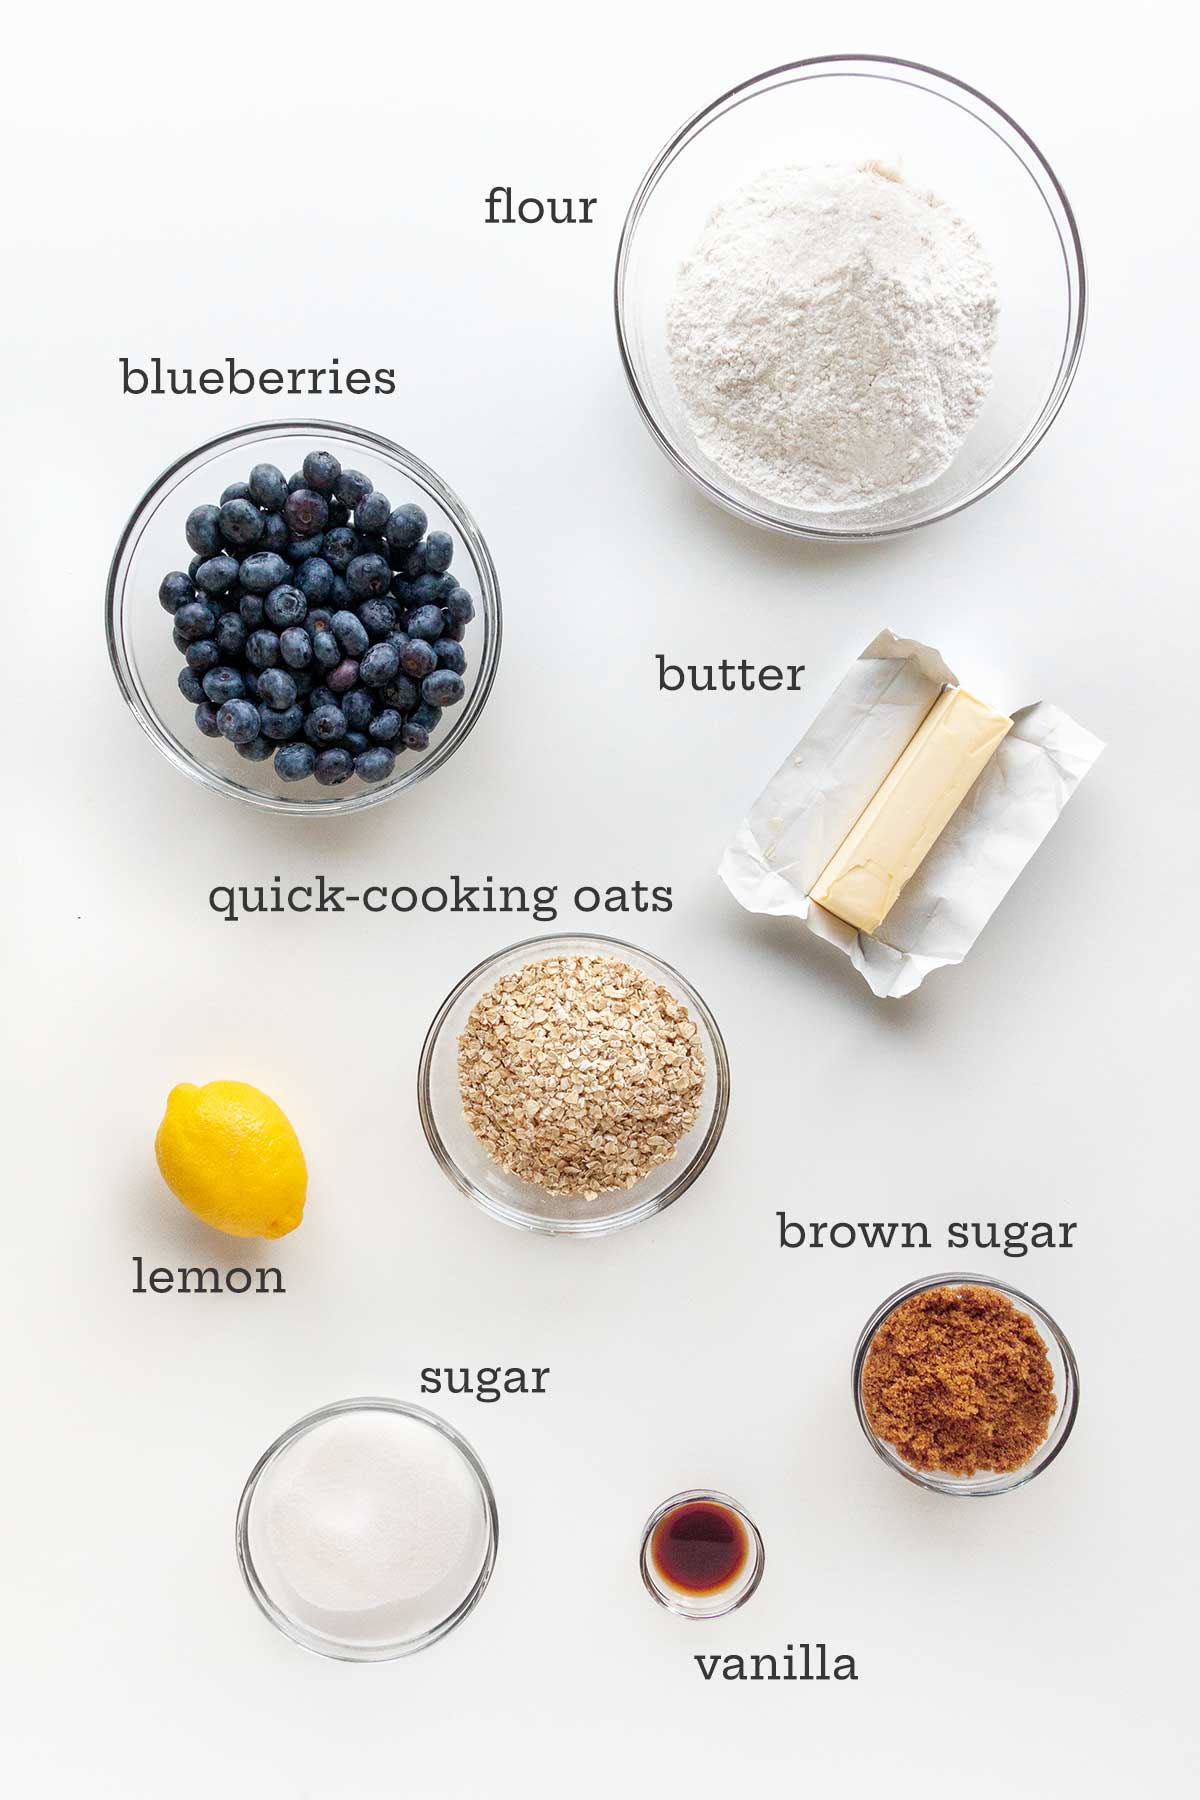 Ingredients for blueberry crumble--blueberries, flour, butter, oats, lemon, white and brown sugars, and vanilla.